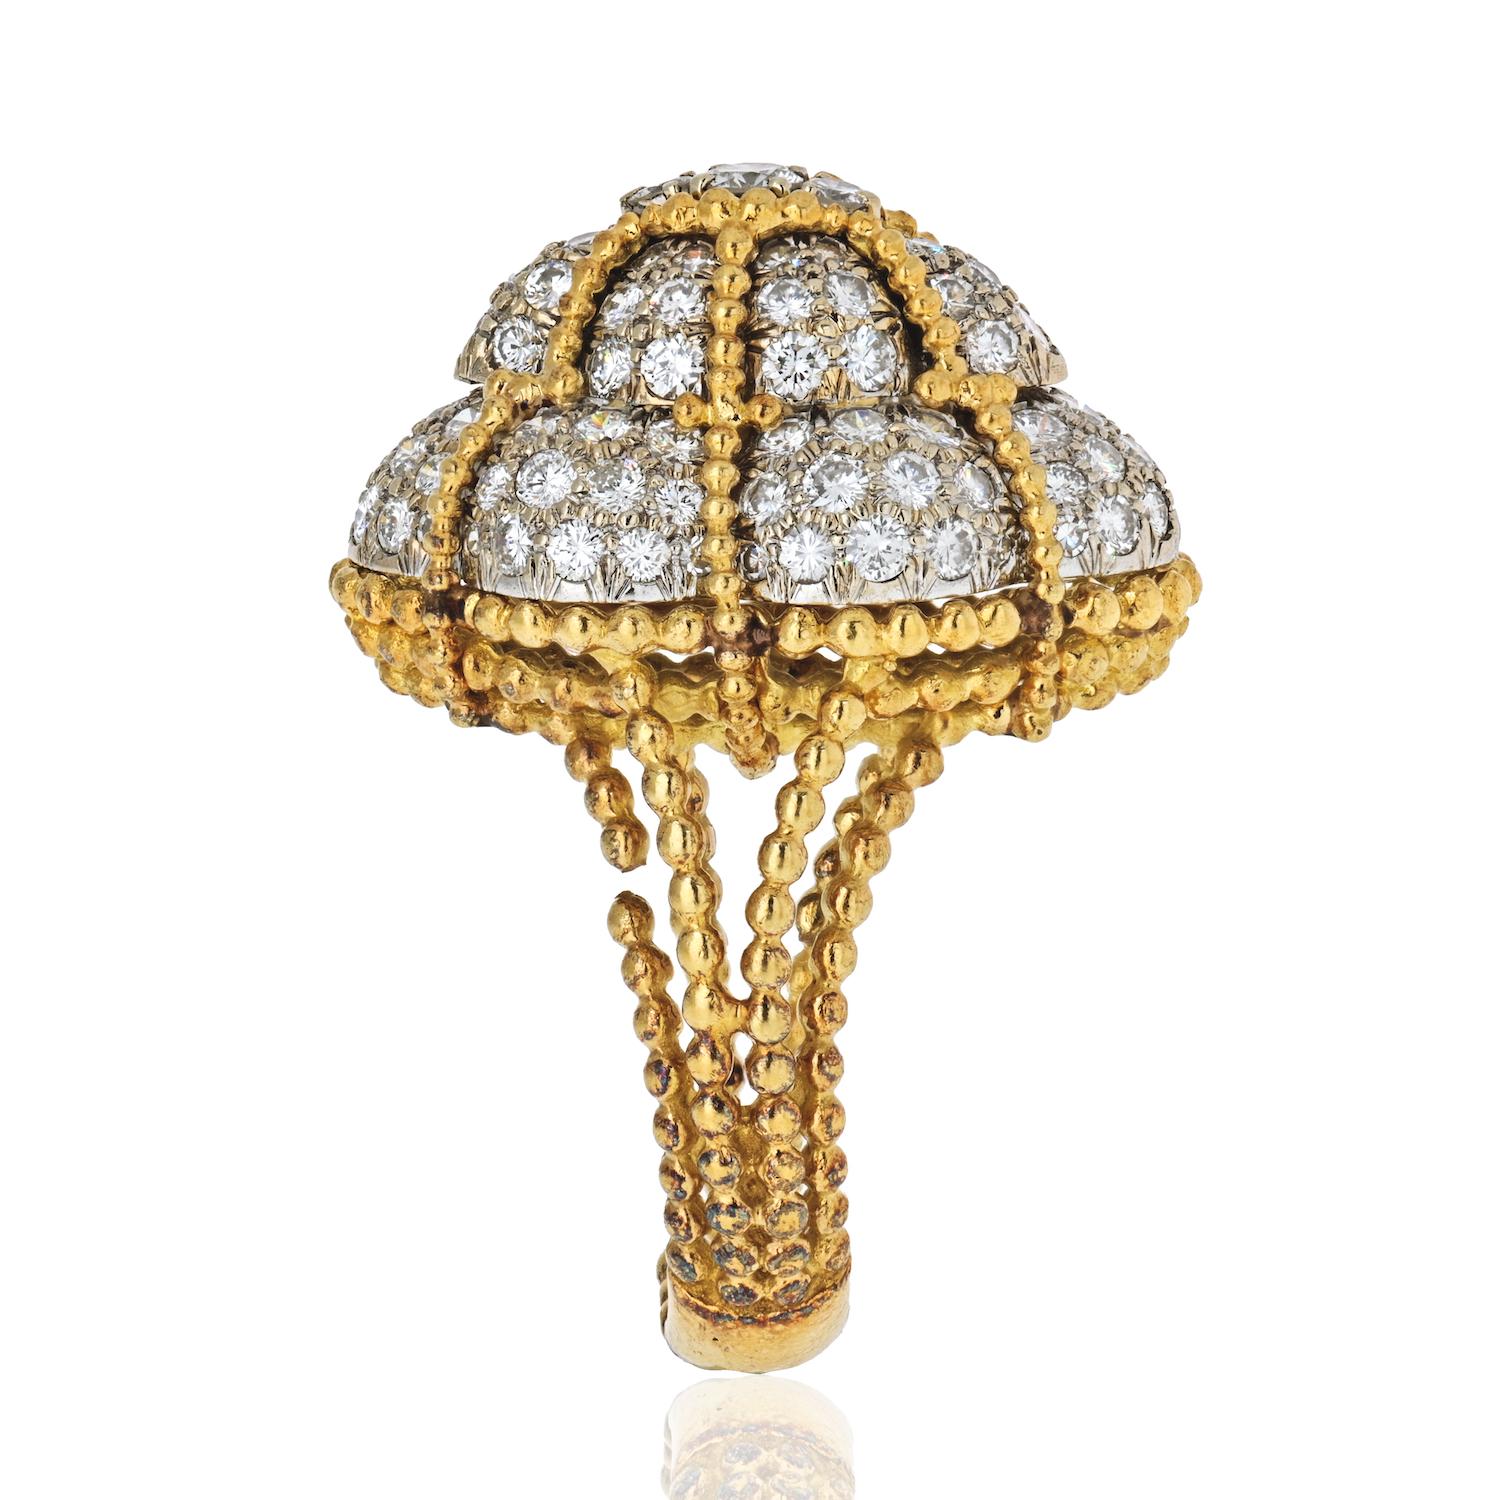 A vintage 18K yellow gold diamond bombe ring. This spectacular retro ring consists of a domed cluster of brilliant-cut diamonds claw set on a split double rope twist wire shank - a bold shiny statement, this stunning ring is sure to be